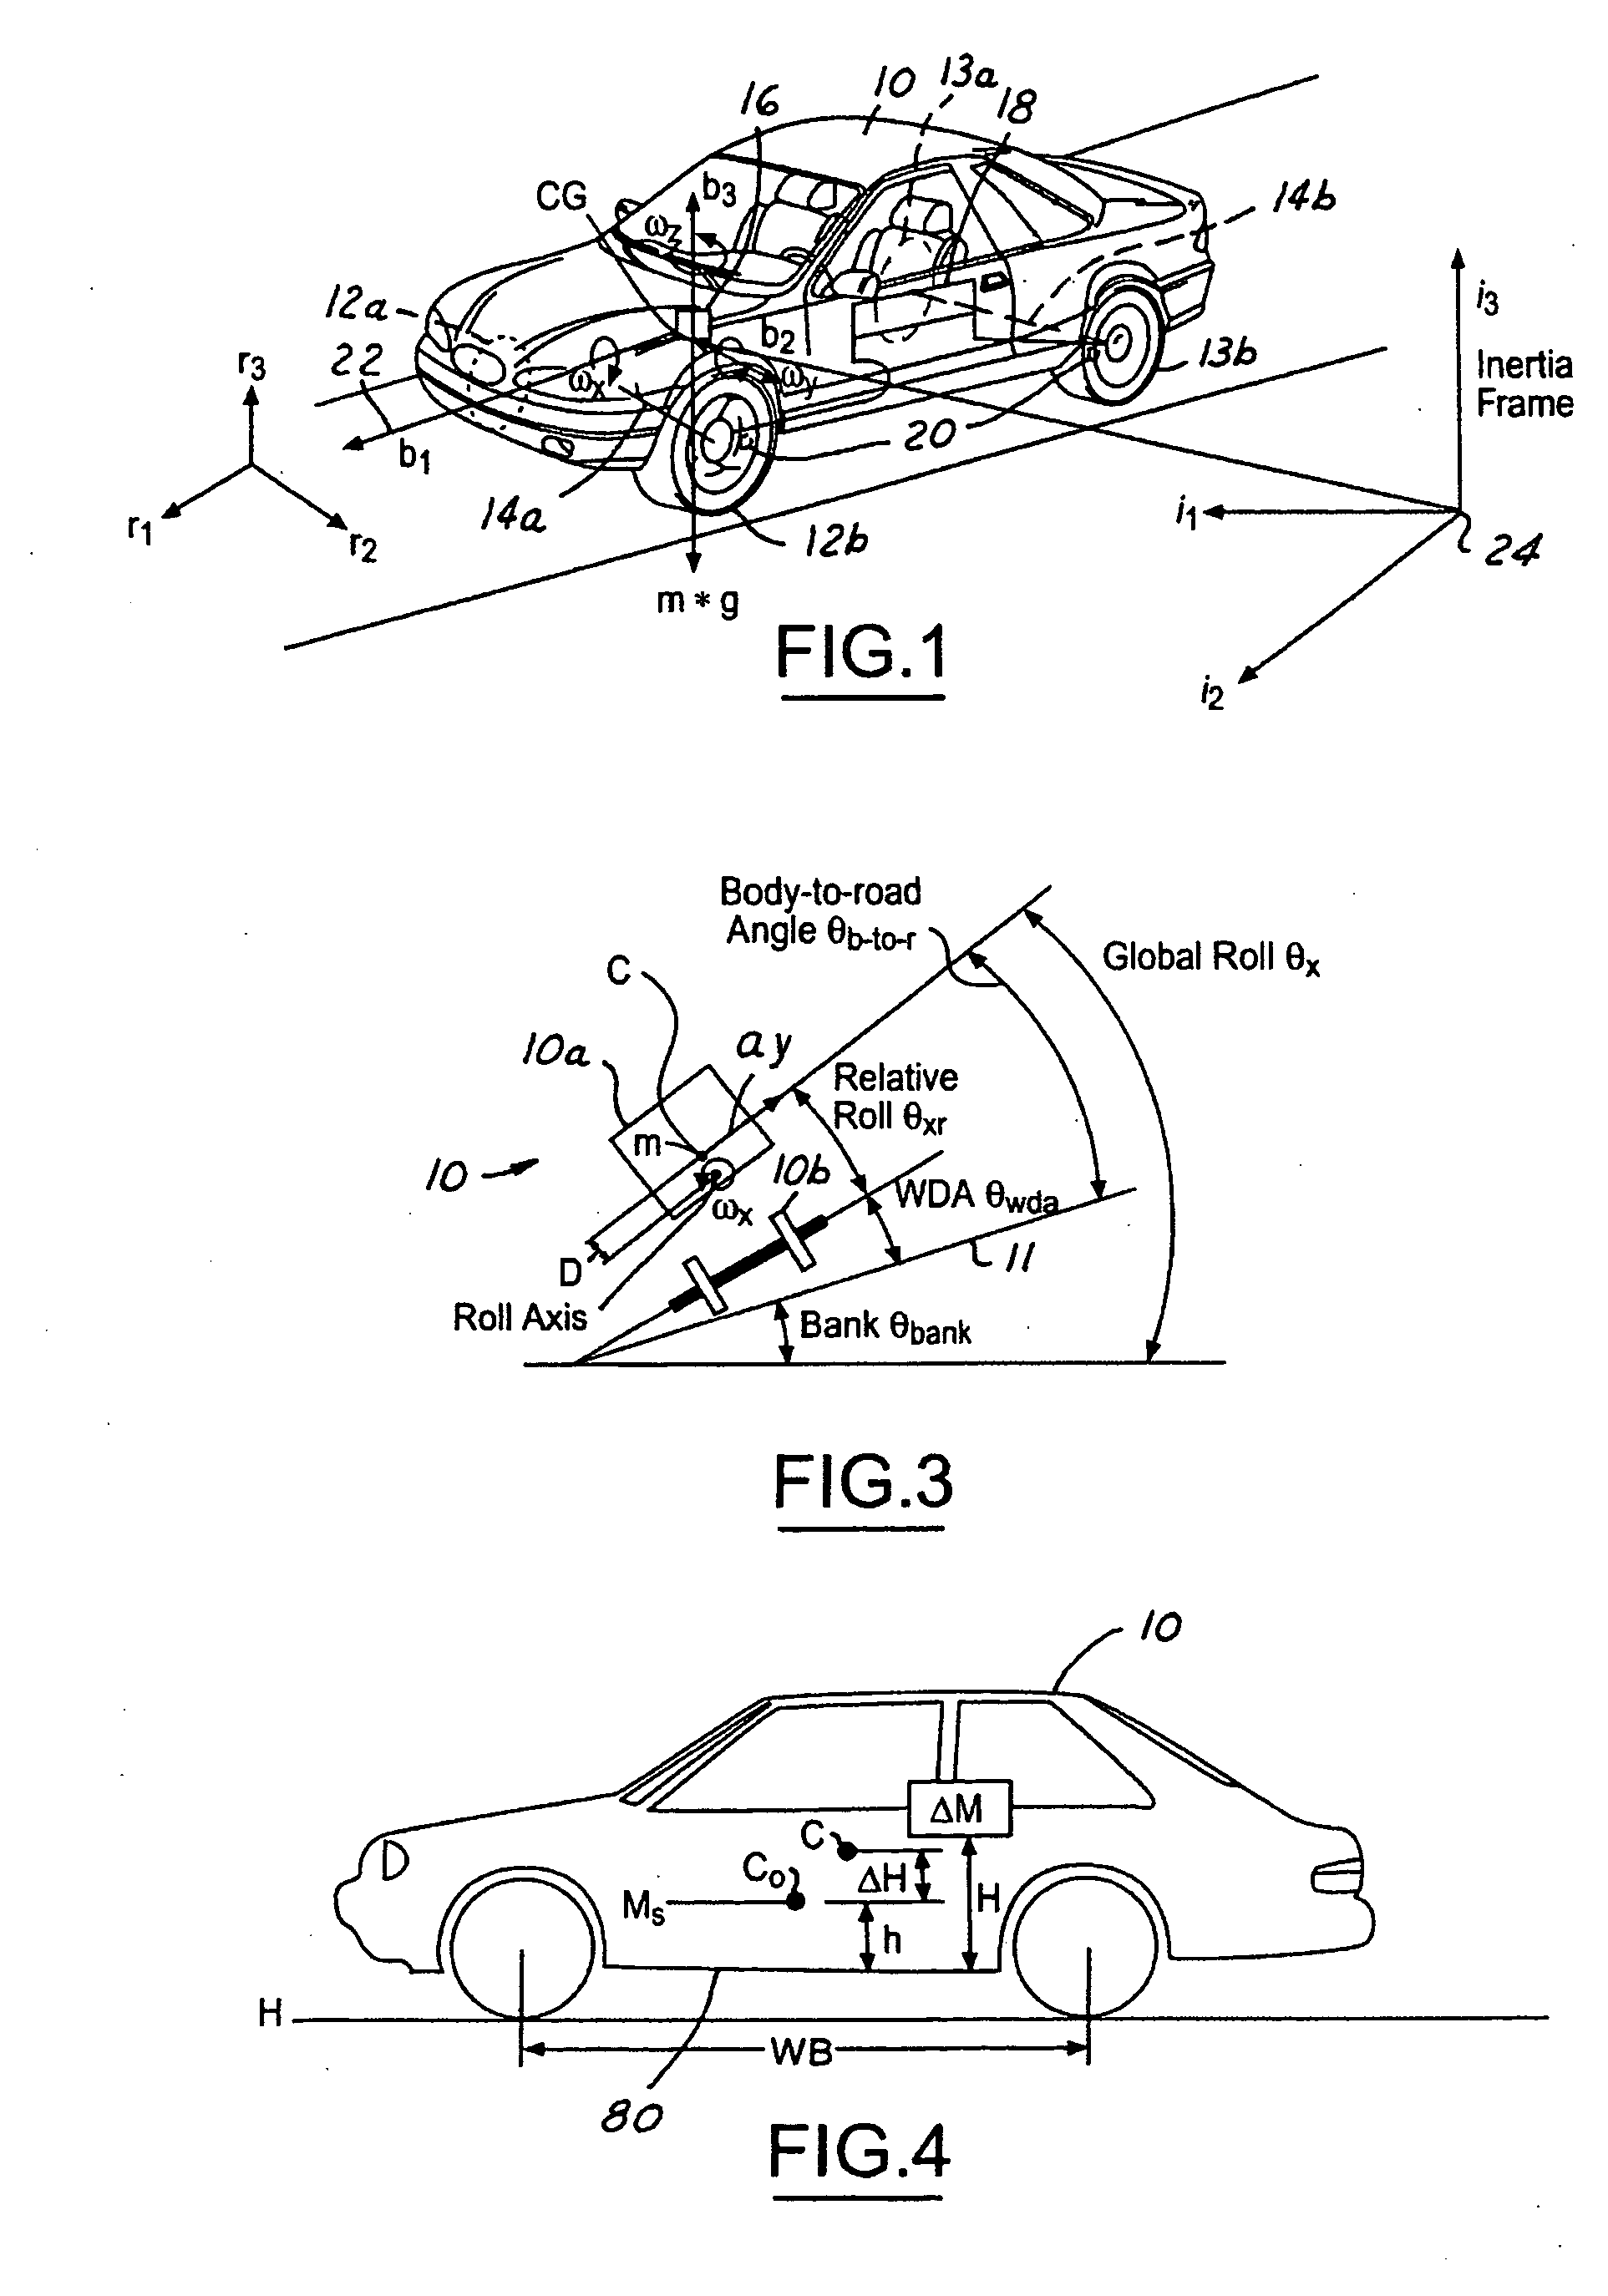 System and method for dynamically determining vehicle loading and vertical loading distance for use in a vehicle dynamic control system